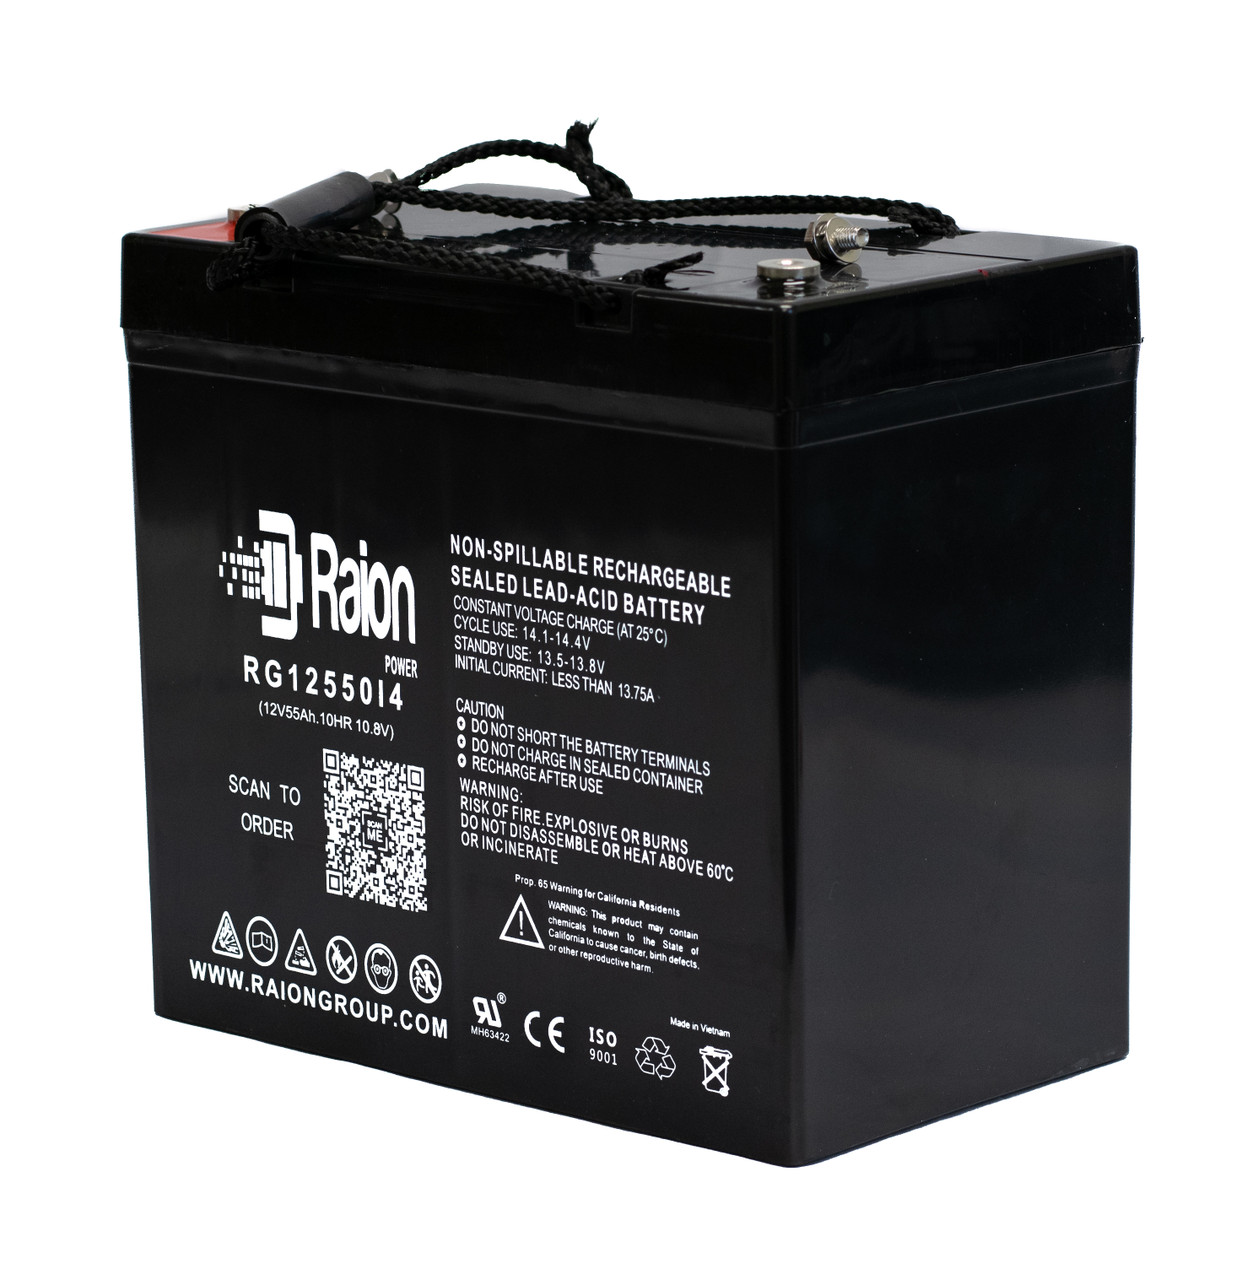 Raion Power Replacement 12V 55Ah Battery for Alpha House AH 12-50 - 1 Pack